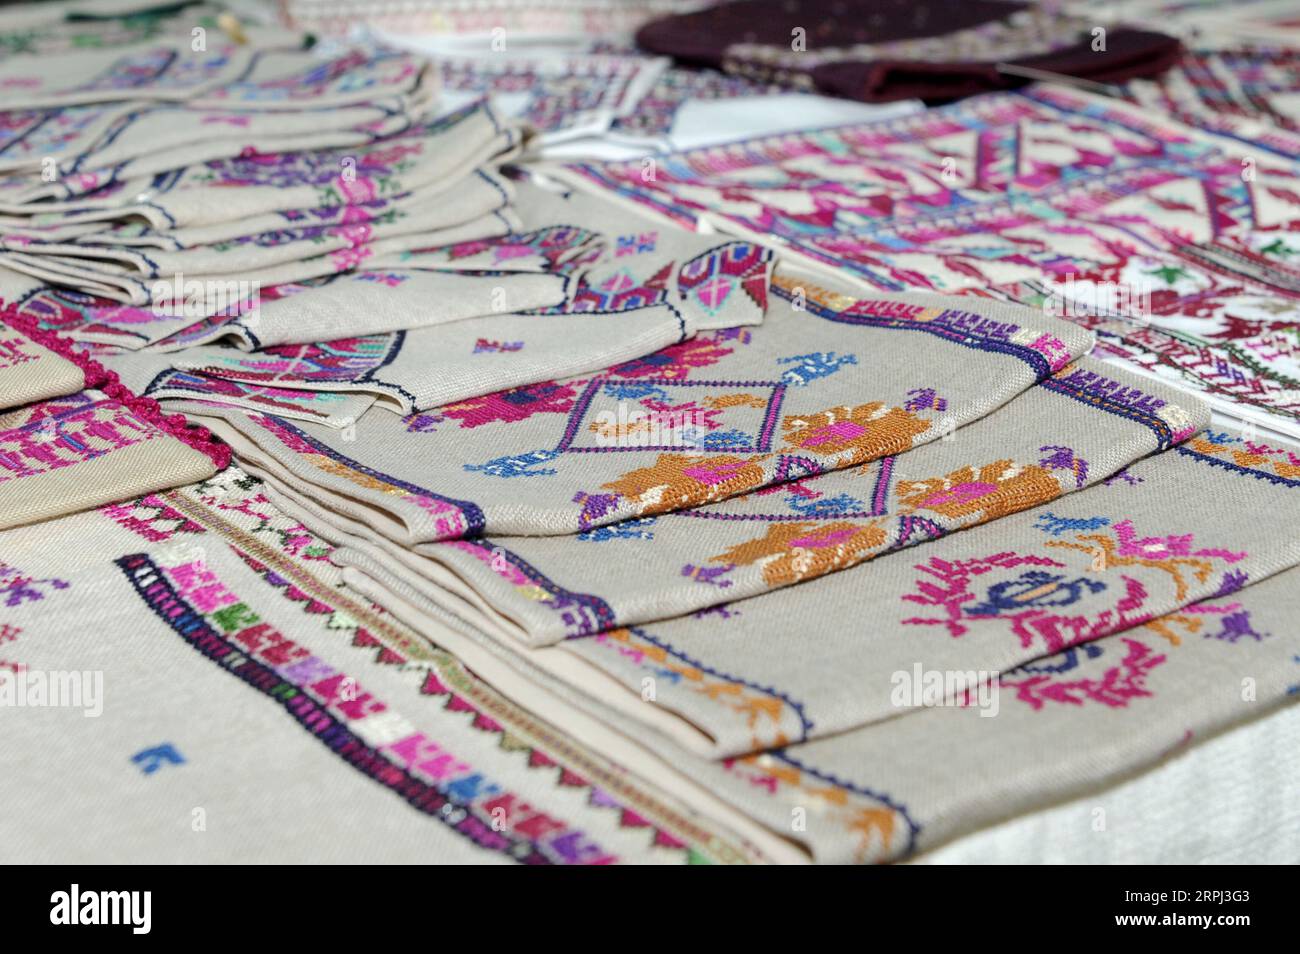 191125 -- KUWAIT CITY, Nov. 25, 2019 Xinhua -- Exhibits are seen at a Palestinian cultural exhibition in Kuwait City, Kuwait, Nov. 25, 2019. A Palestinian cultural exhibition organized by Kuwaiti National Council for Culture, Arts and Letters NCCAL was held here on Monday, showcasing Palestinian embroidery, ceramic, wooden artworks and popular folk food. The exhibition will last until Nov. 28. Photo by Ghazy Qaffaf/Xinhua KUWAIT-KUWAIT CITY-PALESTINE-CULTURAL EXHIBITION PUBLICATIONxNOTxINxCHN Stock Photo